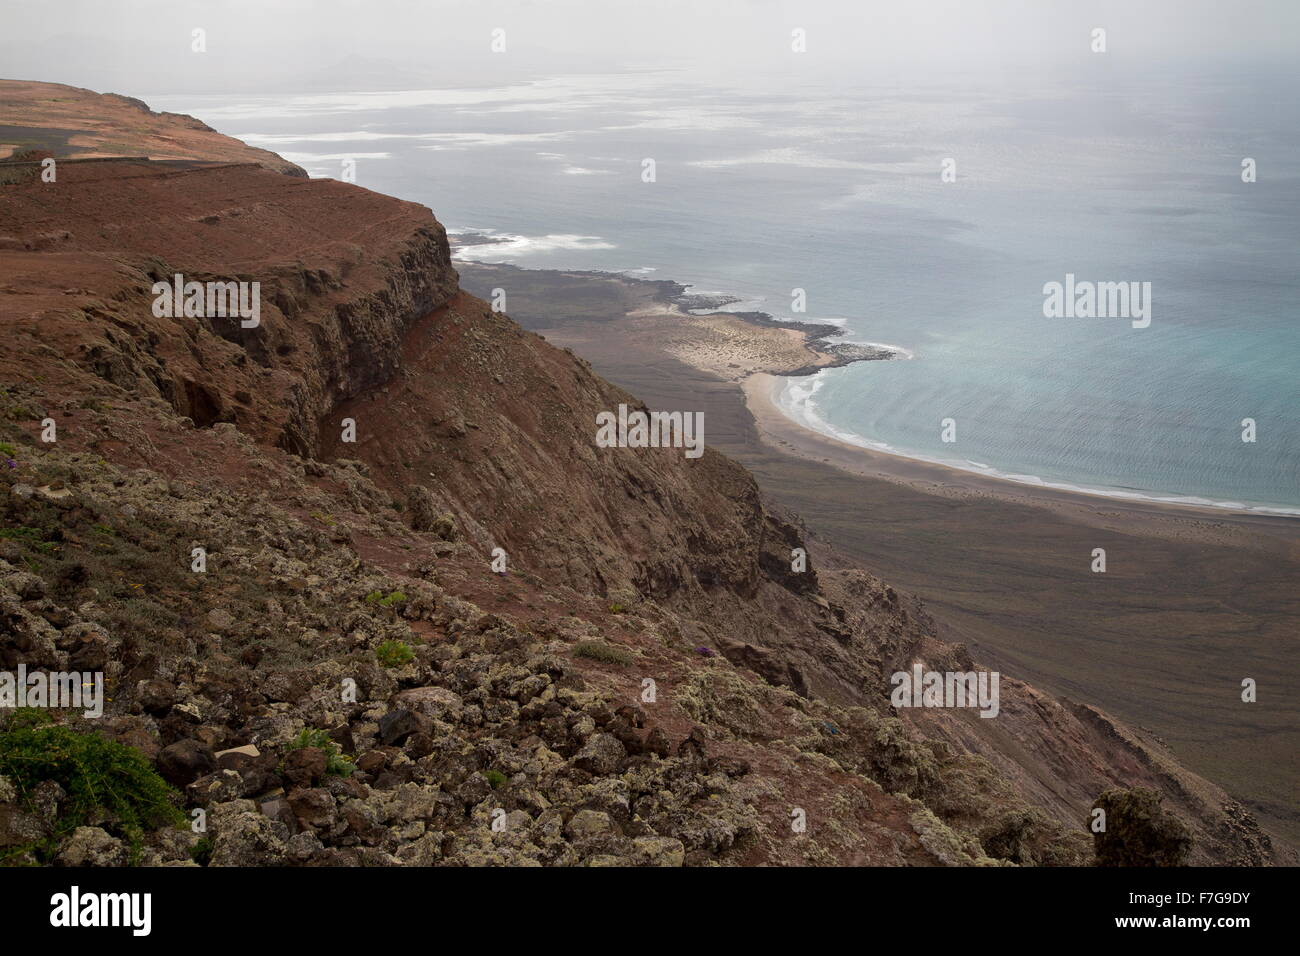 The high volcanic cliffs of El Risco, northenmost Lanzarote; Canary Islands. Stock Photo